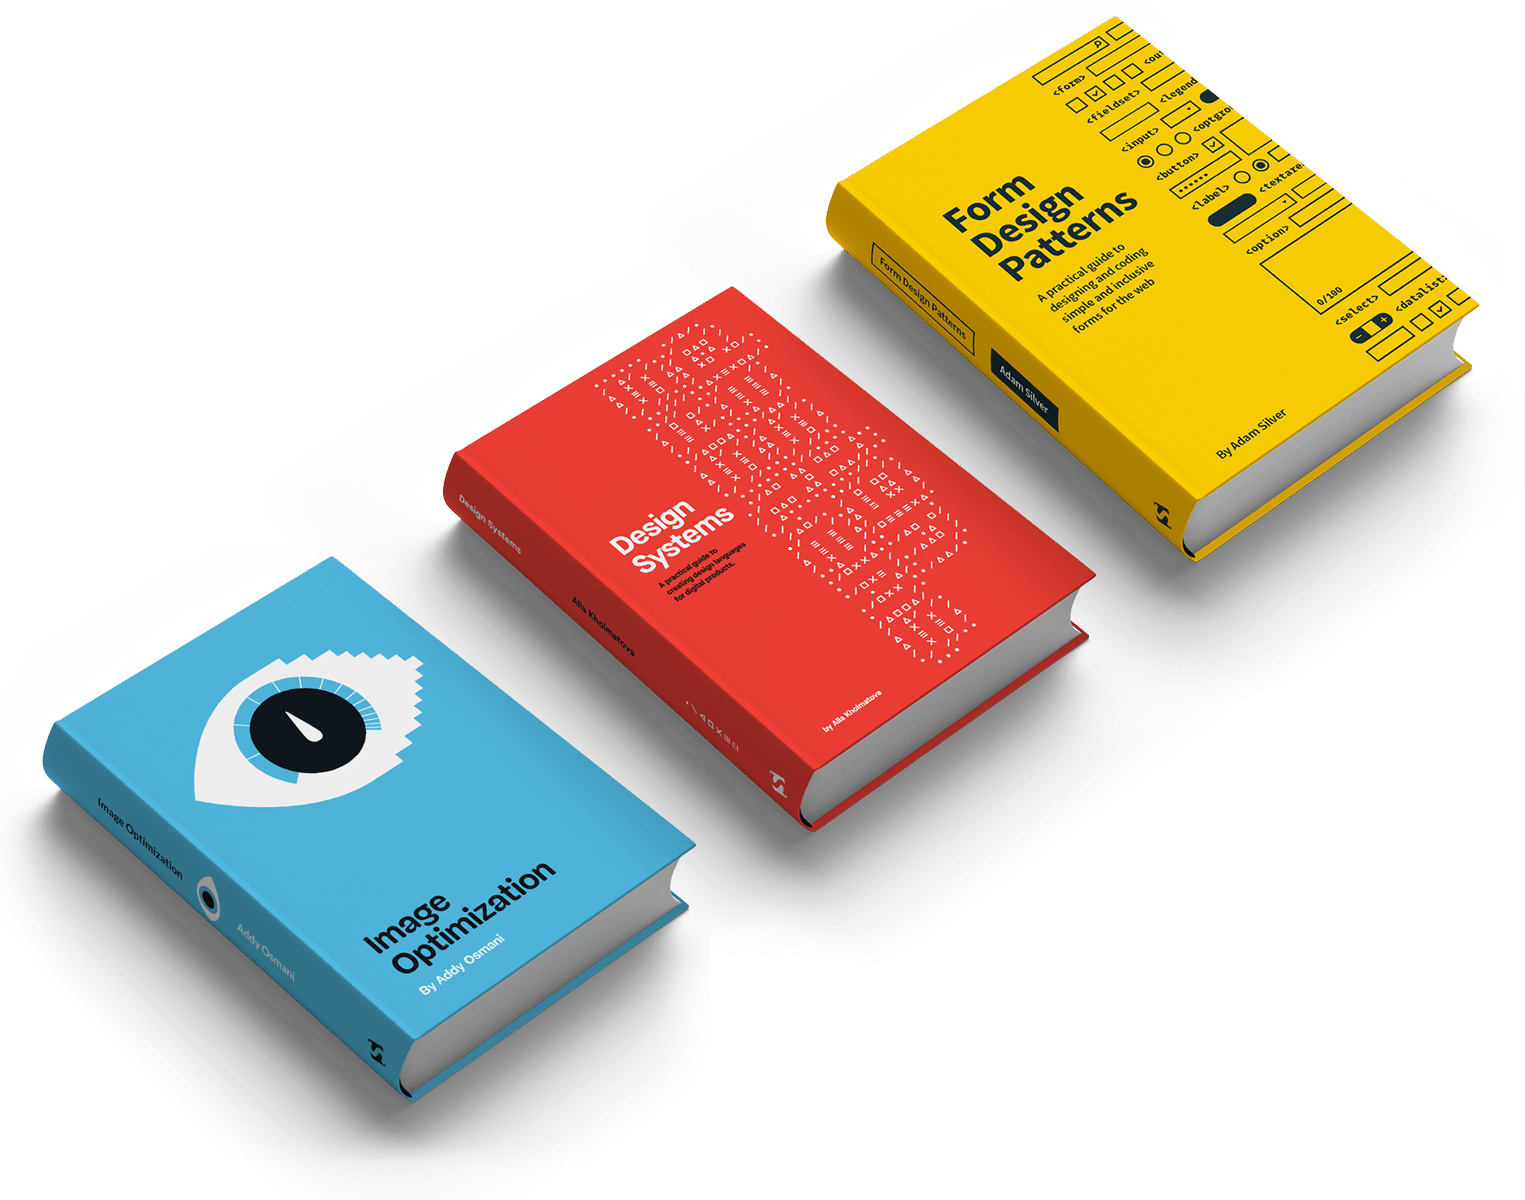 book covers for image optimisation, design systems, and form design patterns, side by side